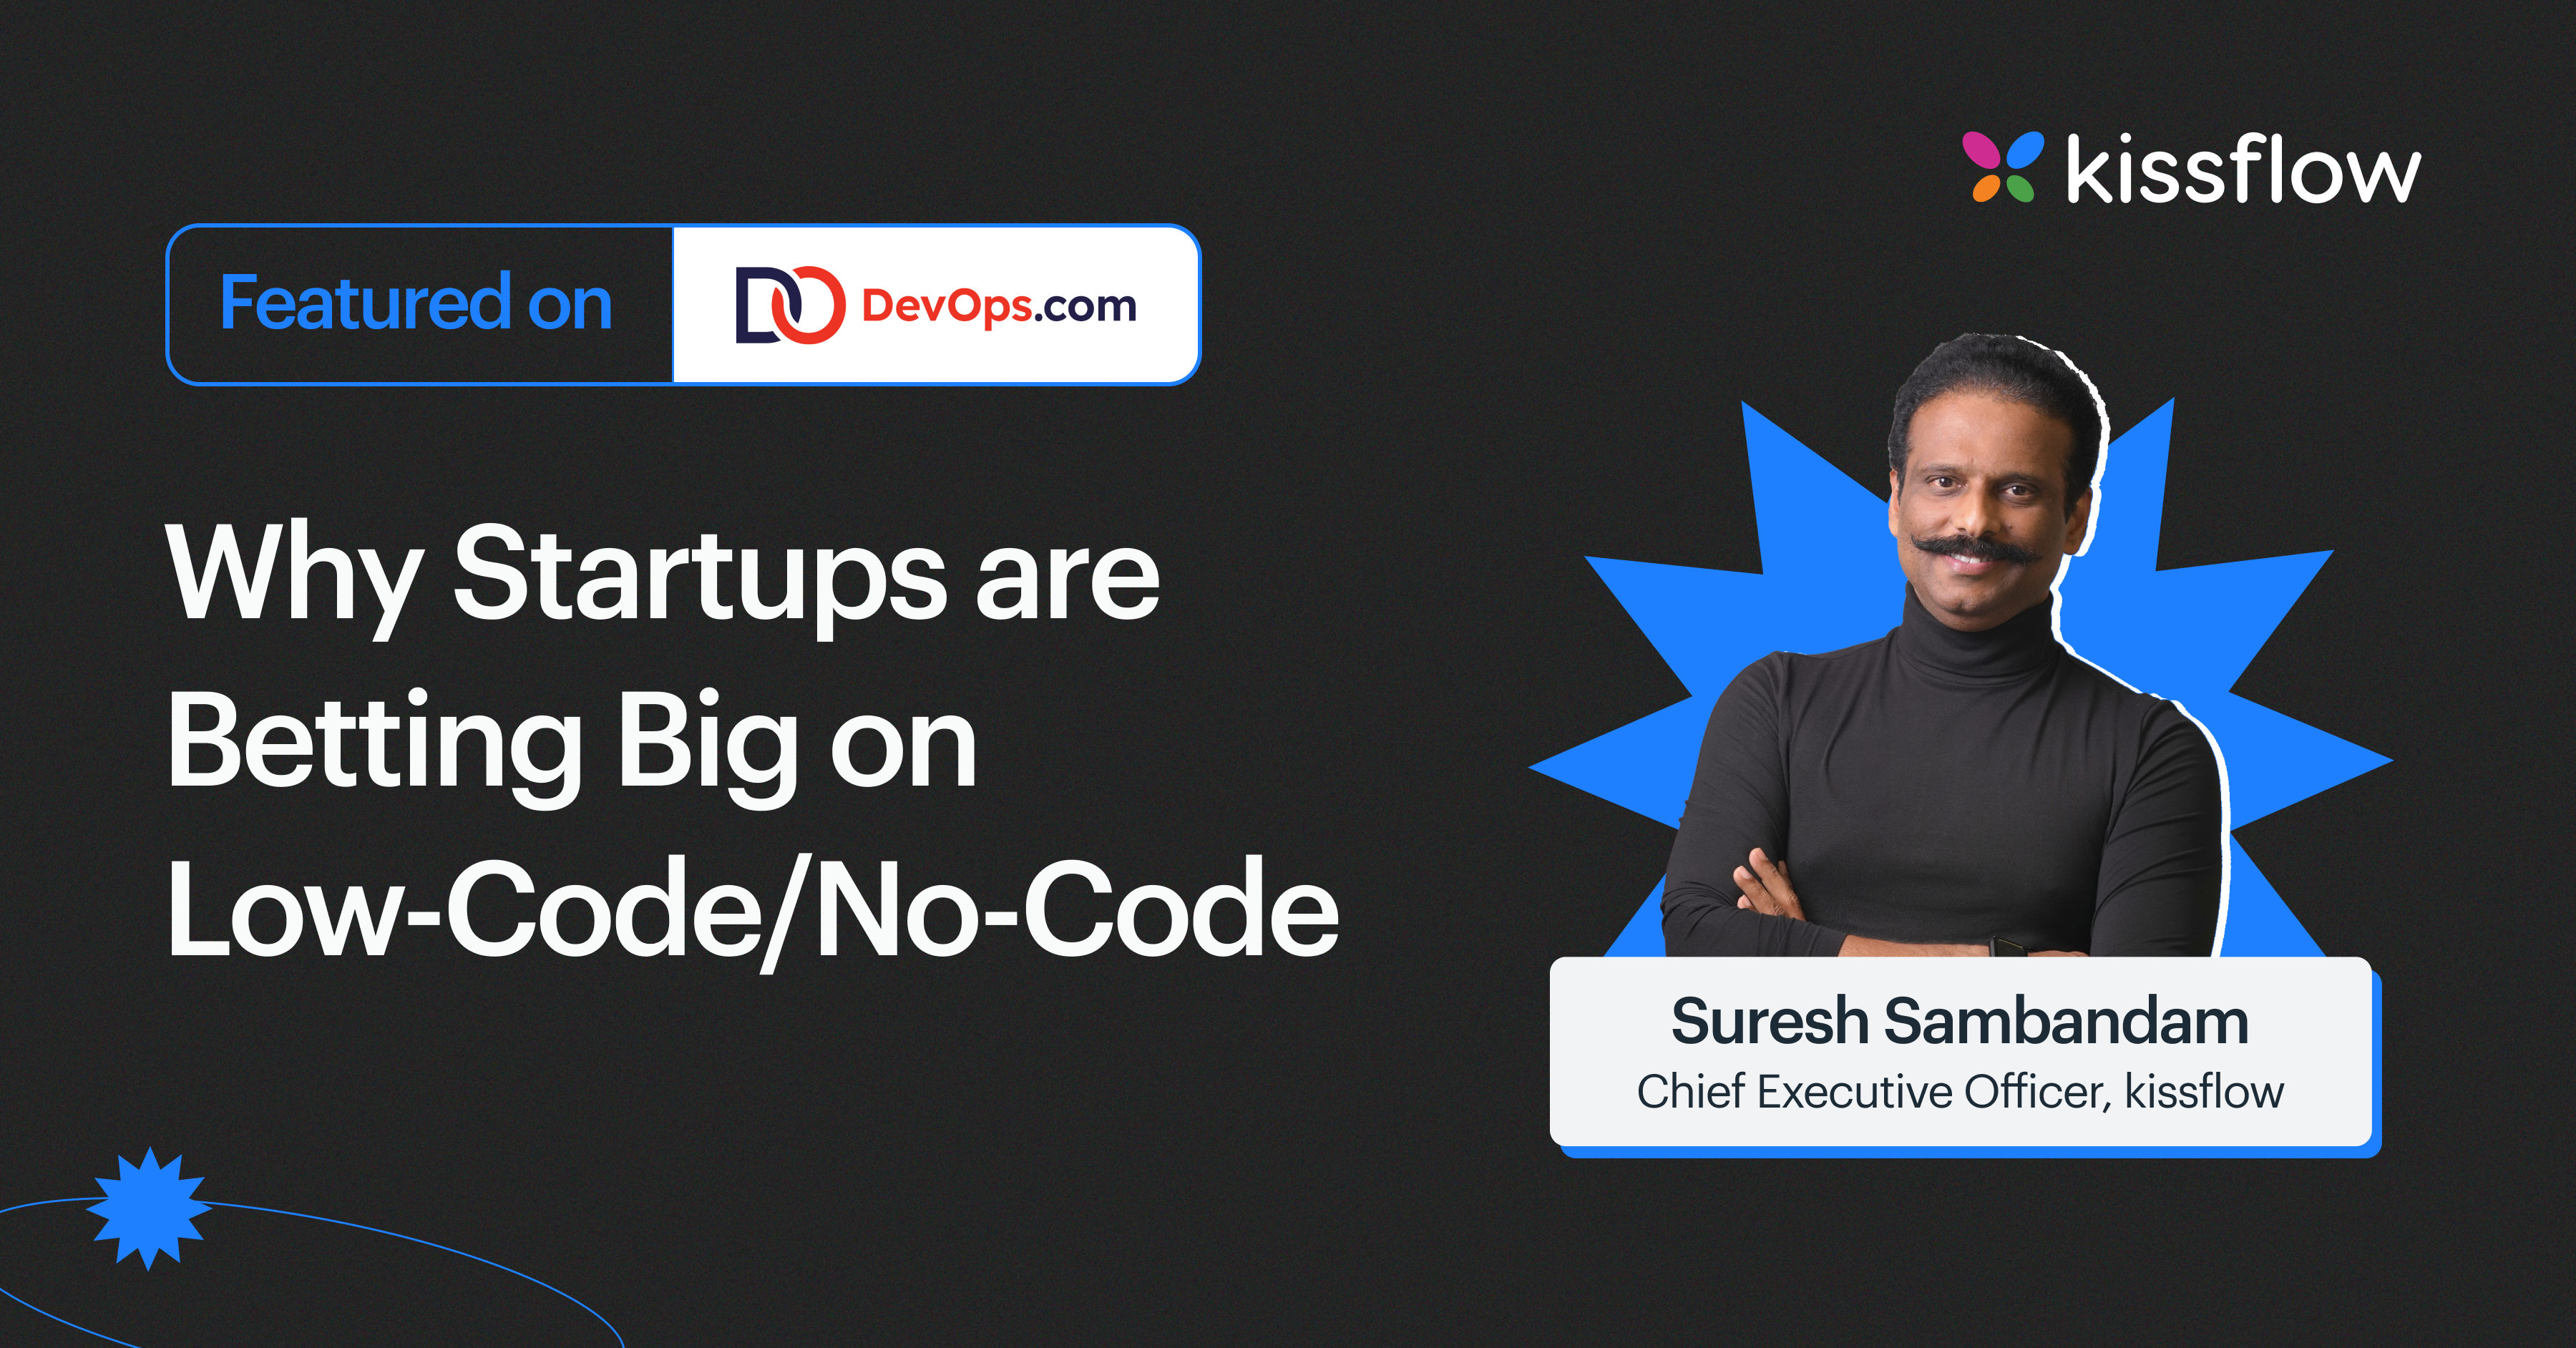 Why Startups are Betting Big on Low-Code/No-Code